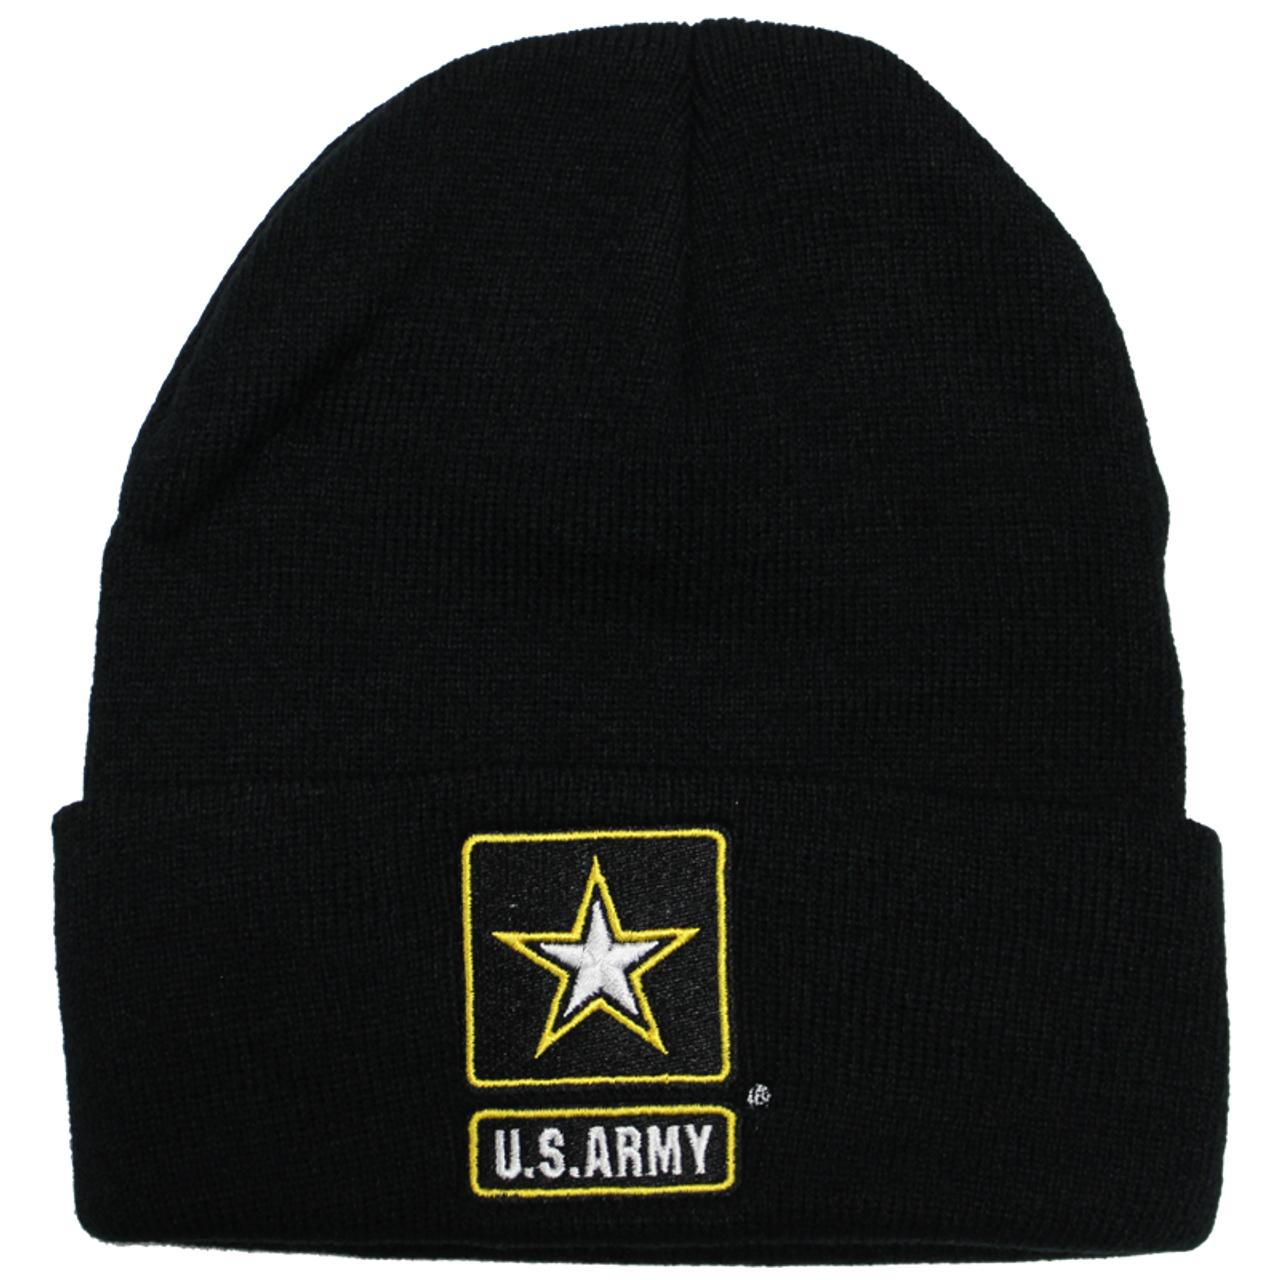 Officially Licensed - US Army Embroidered Logo Beanie